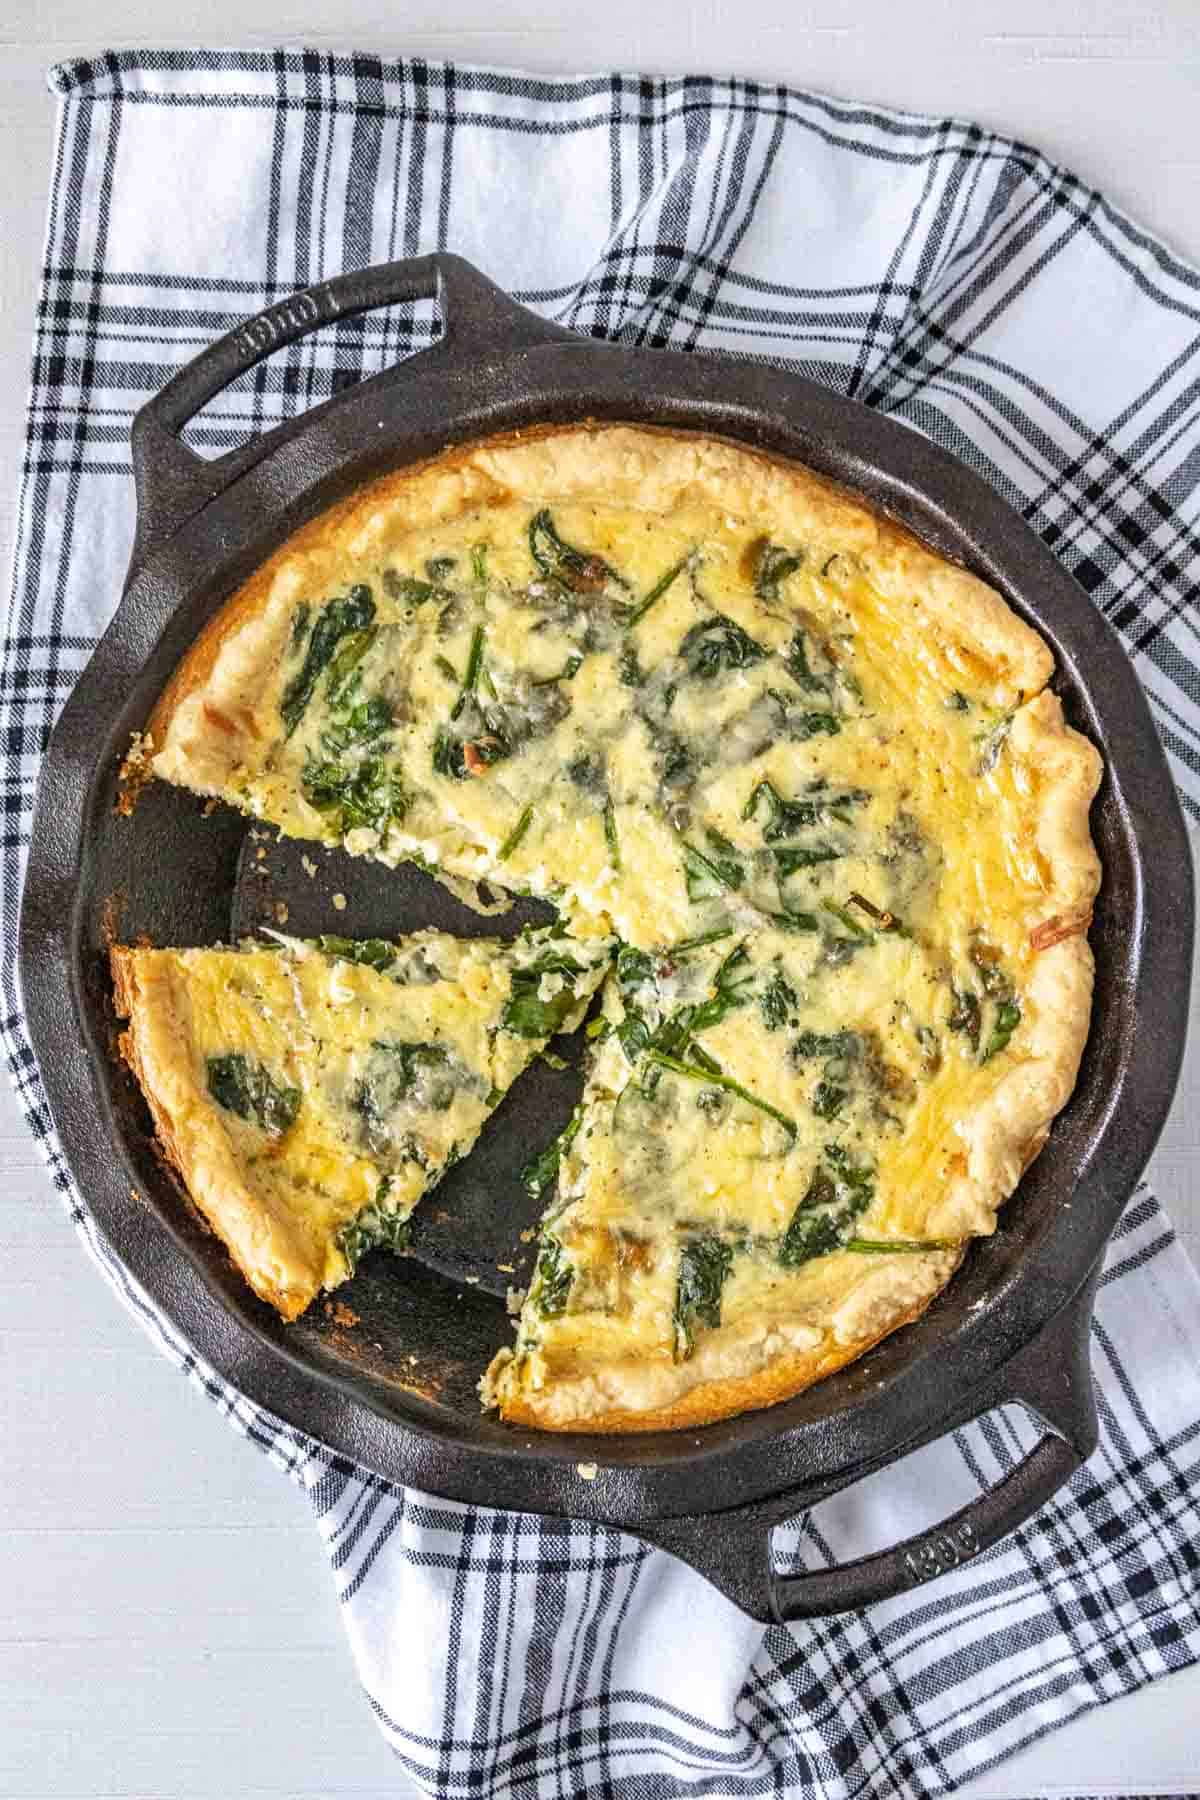 Spinach quiche in a cast iron pie plate with a black and white kitchen towel.